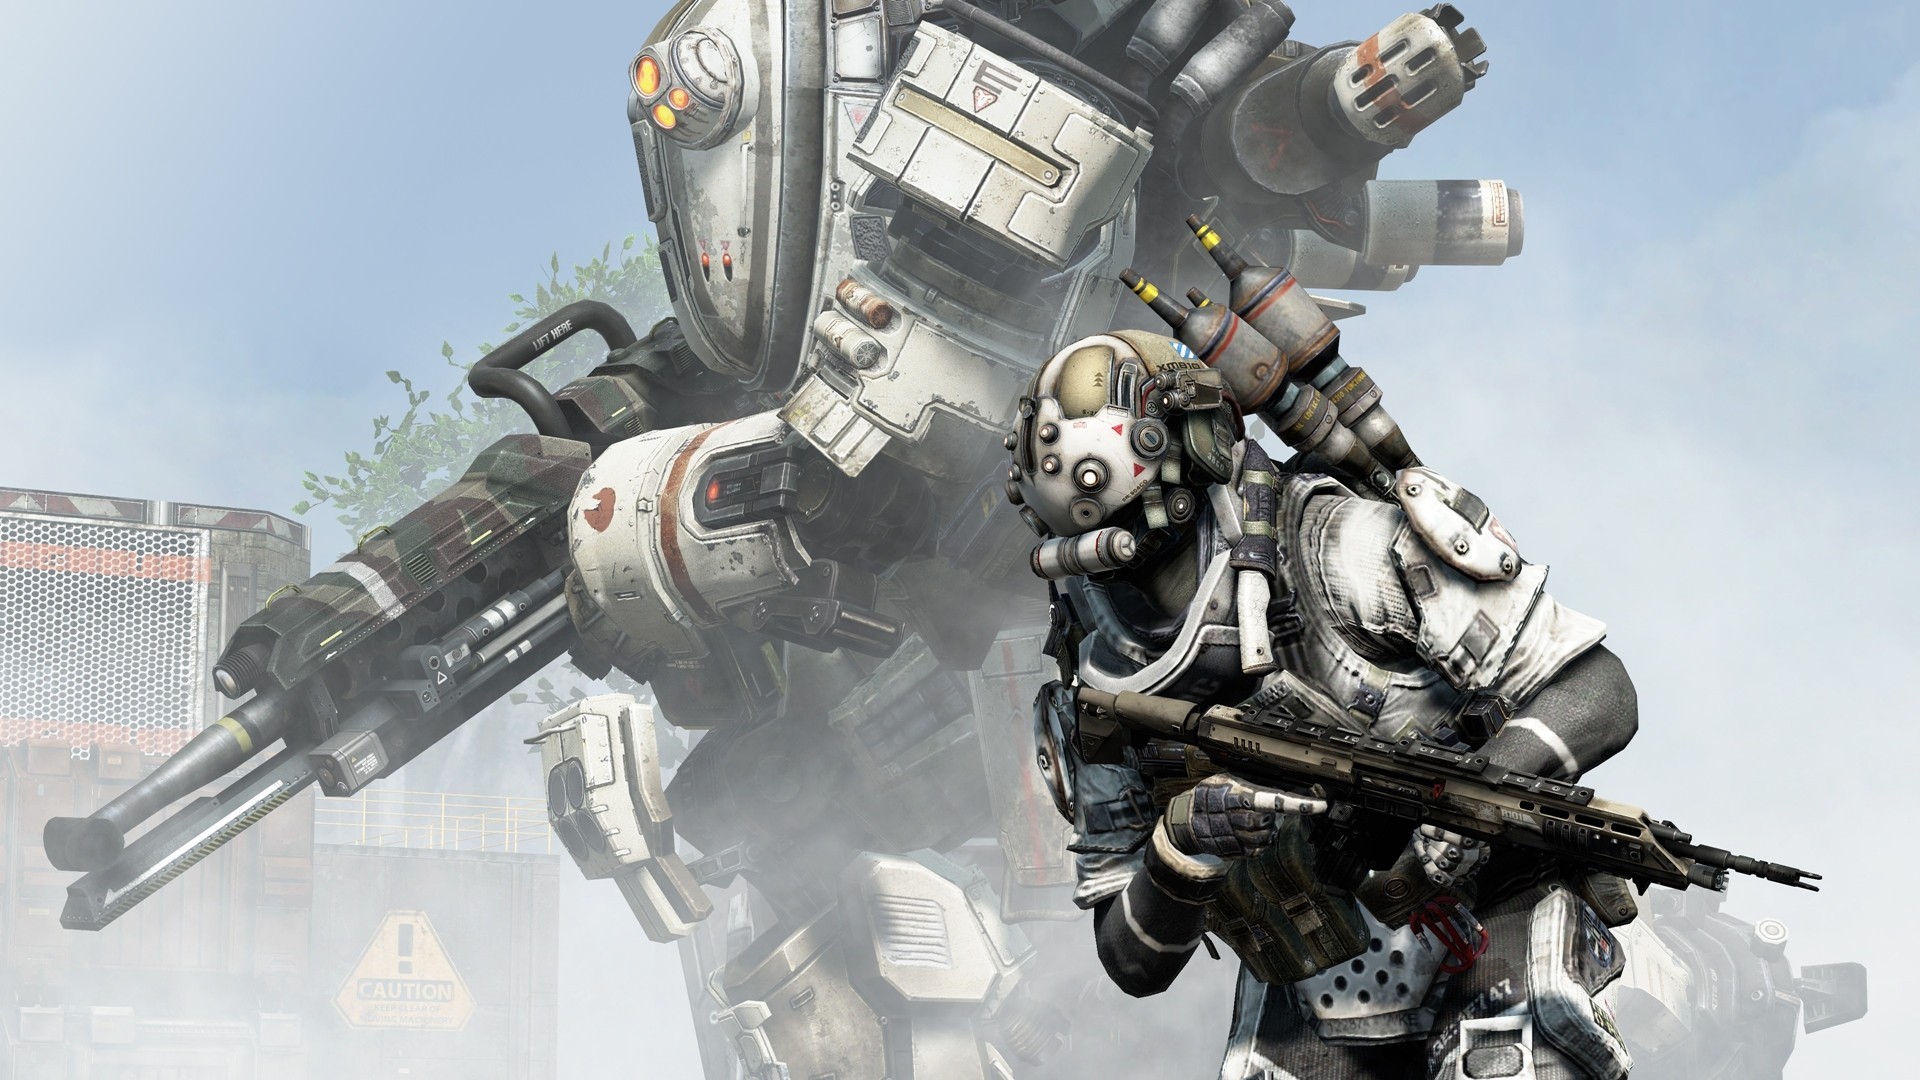 titanfall, soldier, titanfall 2, video game, robot, weapon